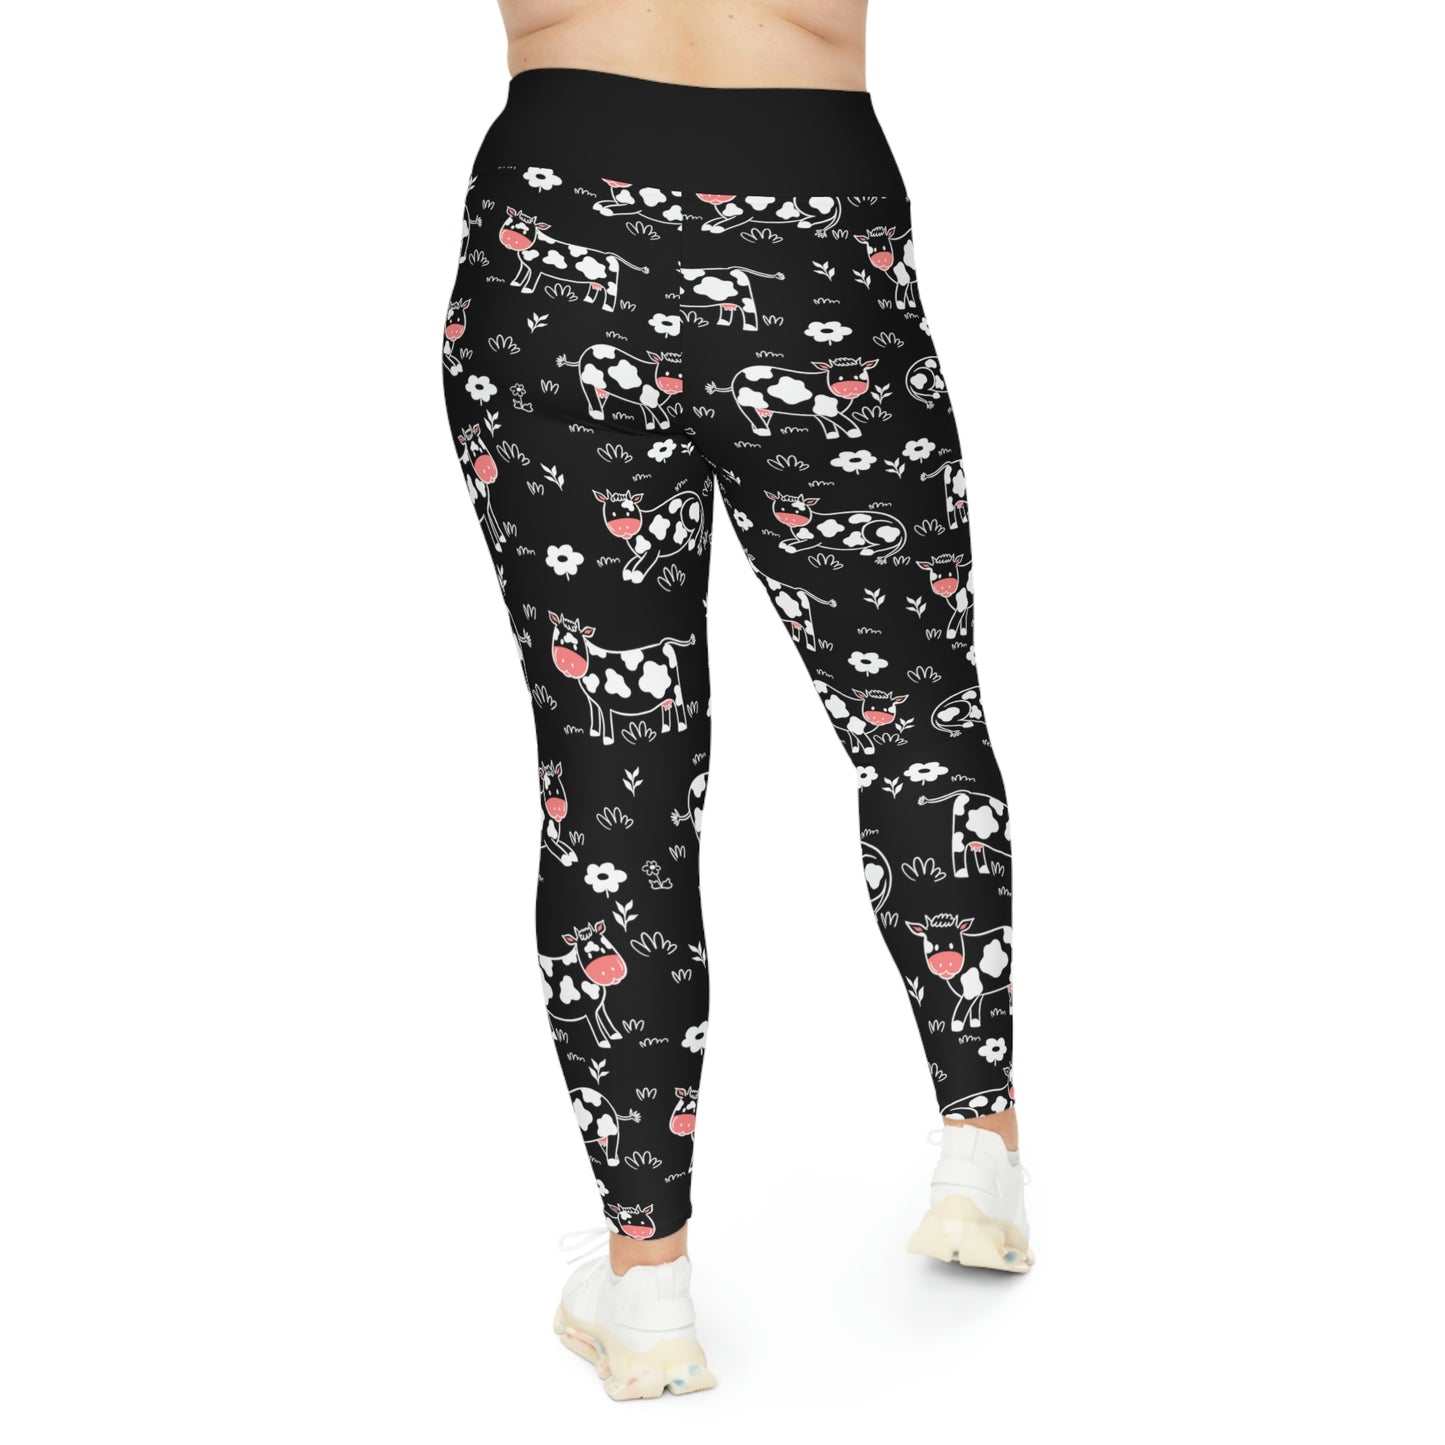 Cow Farm Animals Plus Size Leggings One of a Kind Unique Workout Activewear tights for Mom fitness, Mothers Day, Girlfriend Christmas Gift